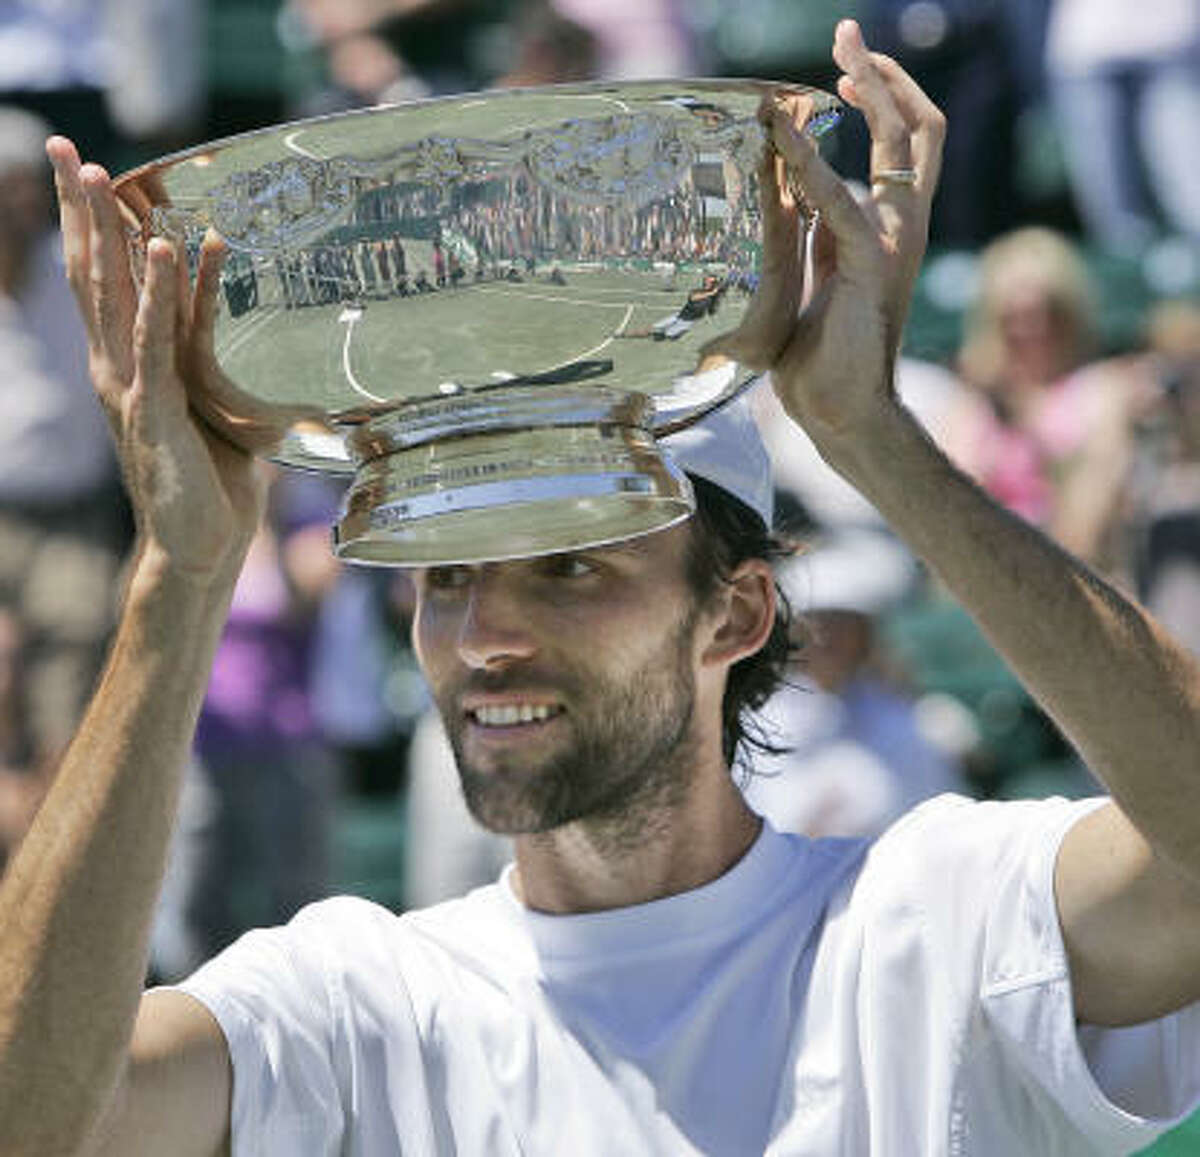 Ivo Karlovic held the champion's trophy for the first time in his career on Sunday. He recoreded 10 aces in the final match, giving him 53 for the week.